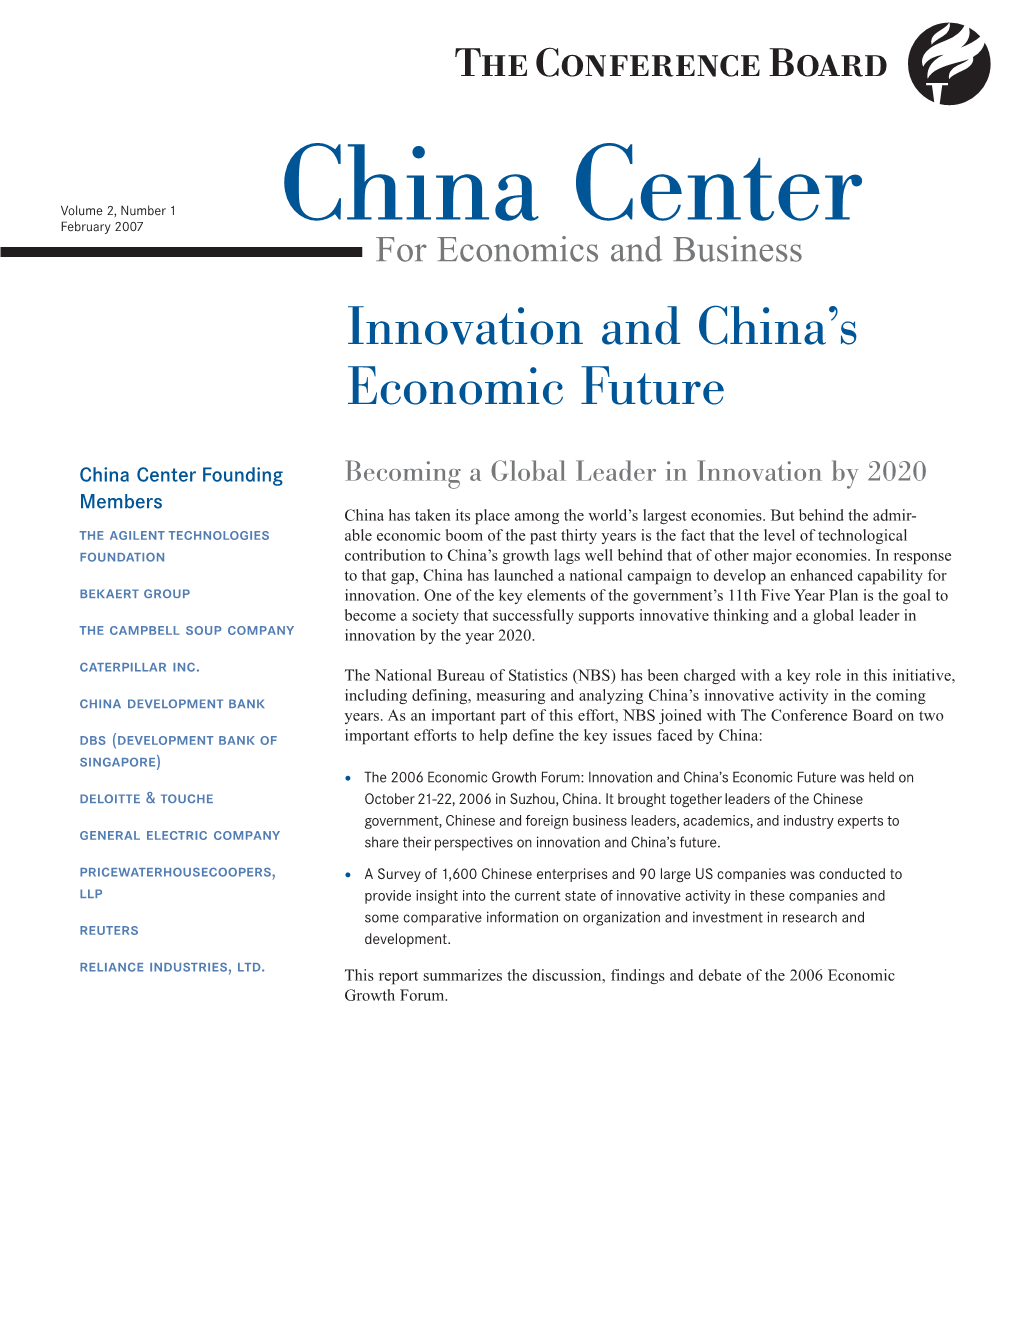 China Center for Economics and Business Innovation and China’S Economic Future